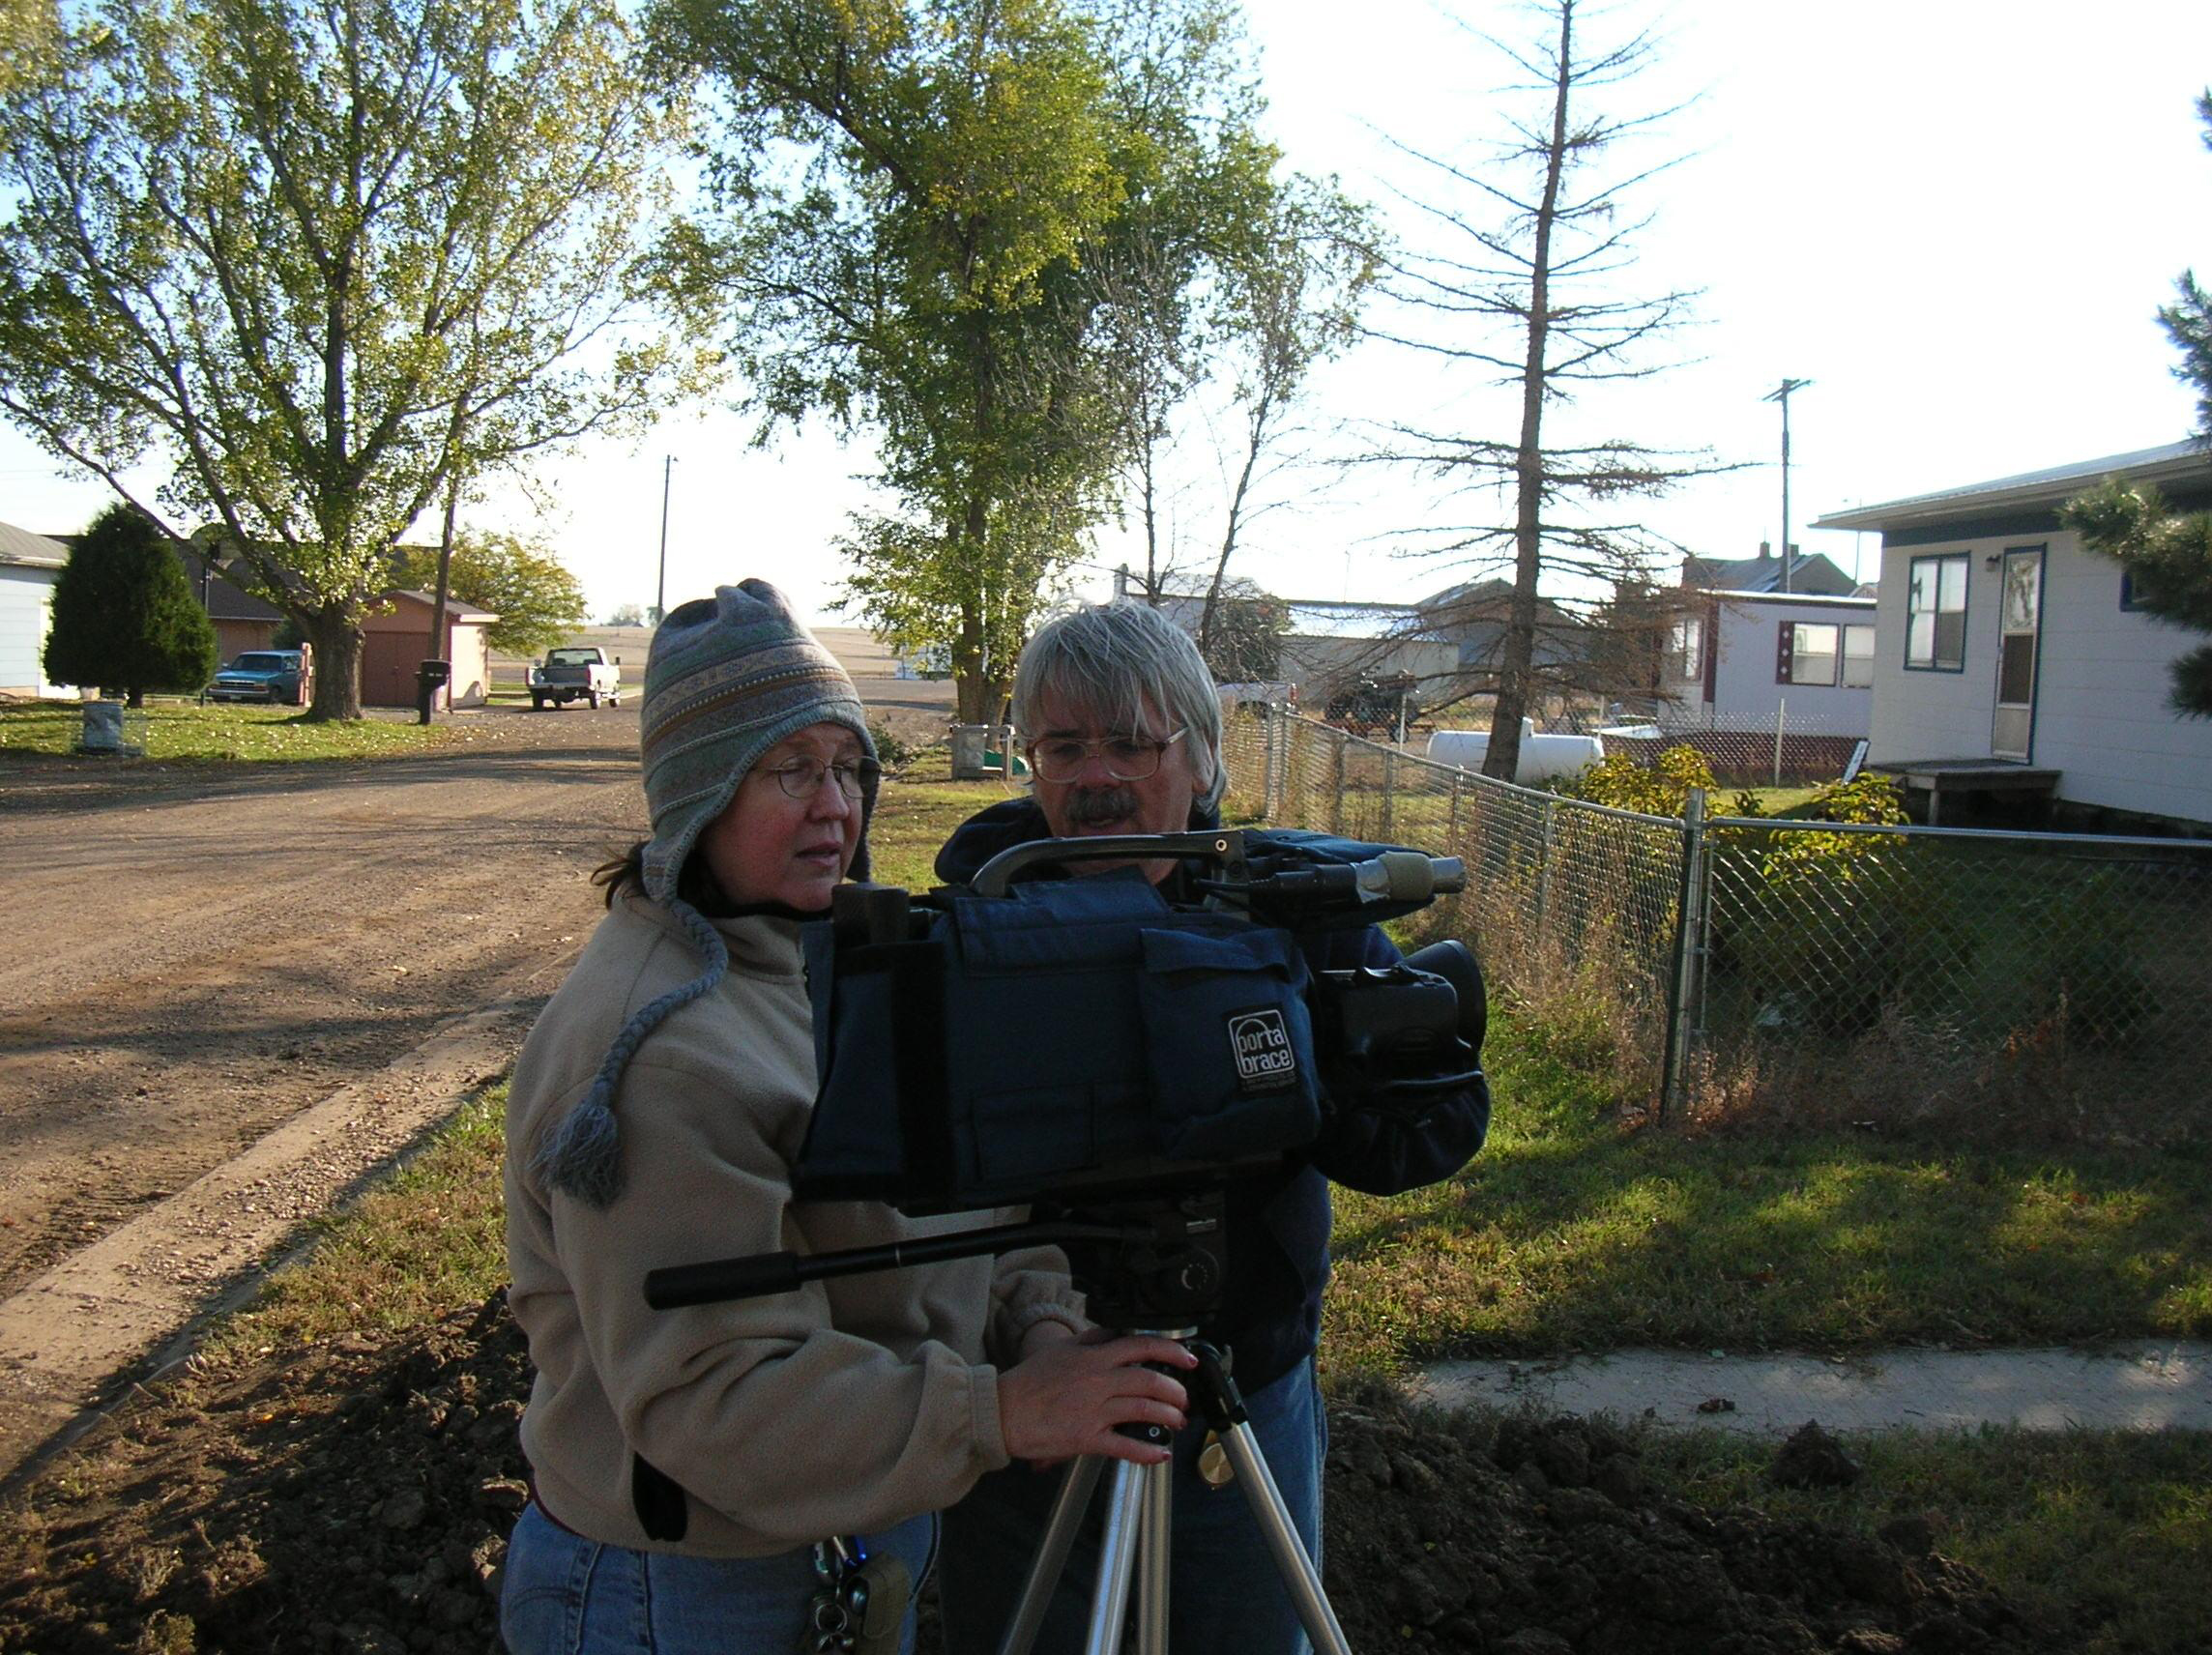 Producer/Director Renn Reed assisted by co-producer Mark L. Barth filming, 